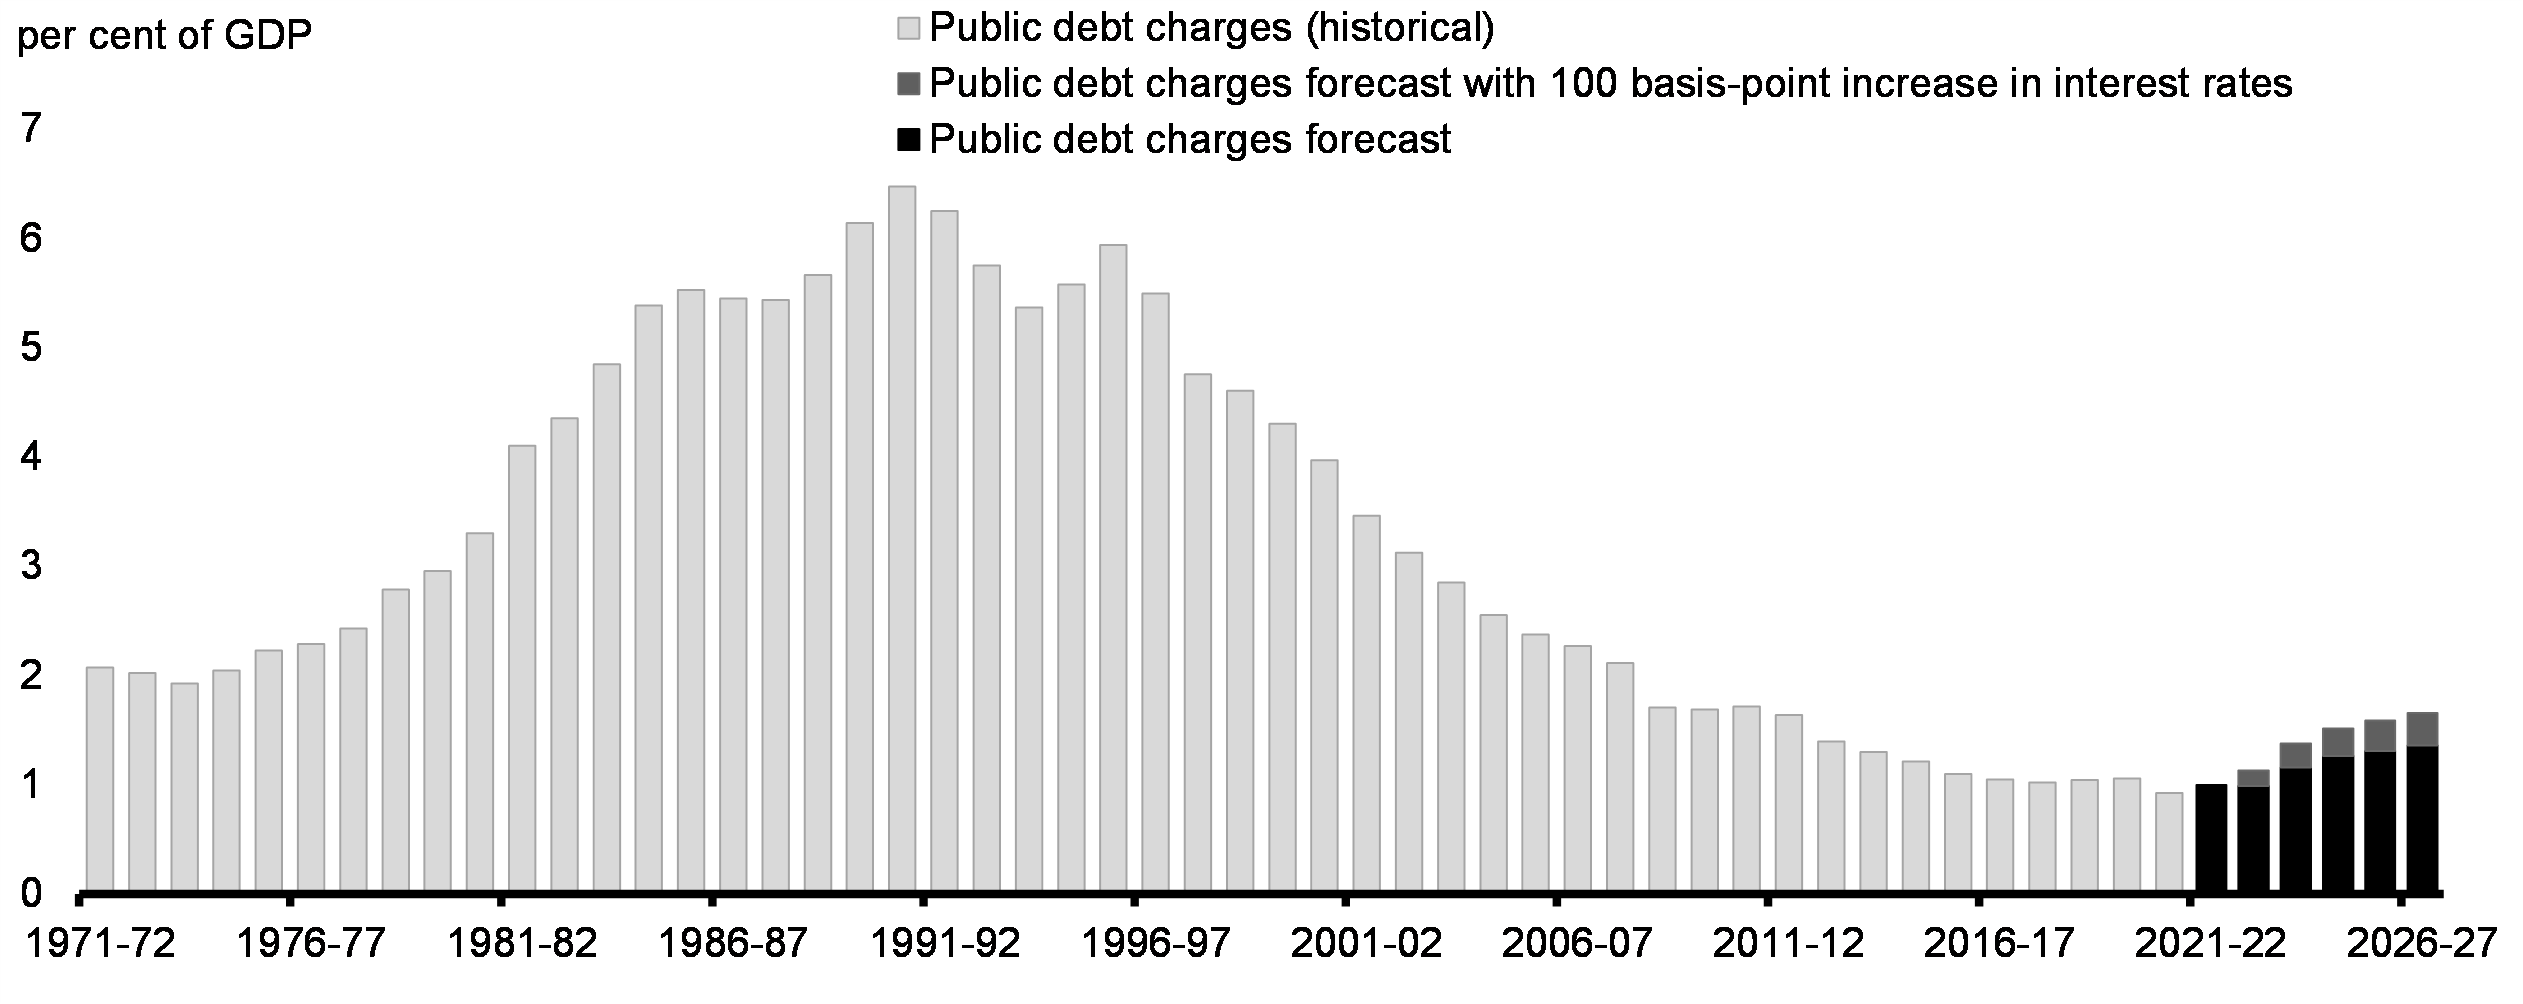 Chart 27: Historical Public Debt Charges as a Proportion of GDP, and Projected Sensitivity to a 100 Basis-Point Increase in Interest Rates